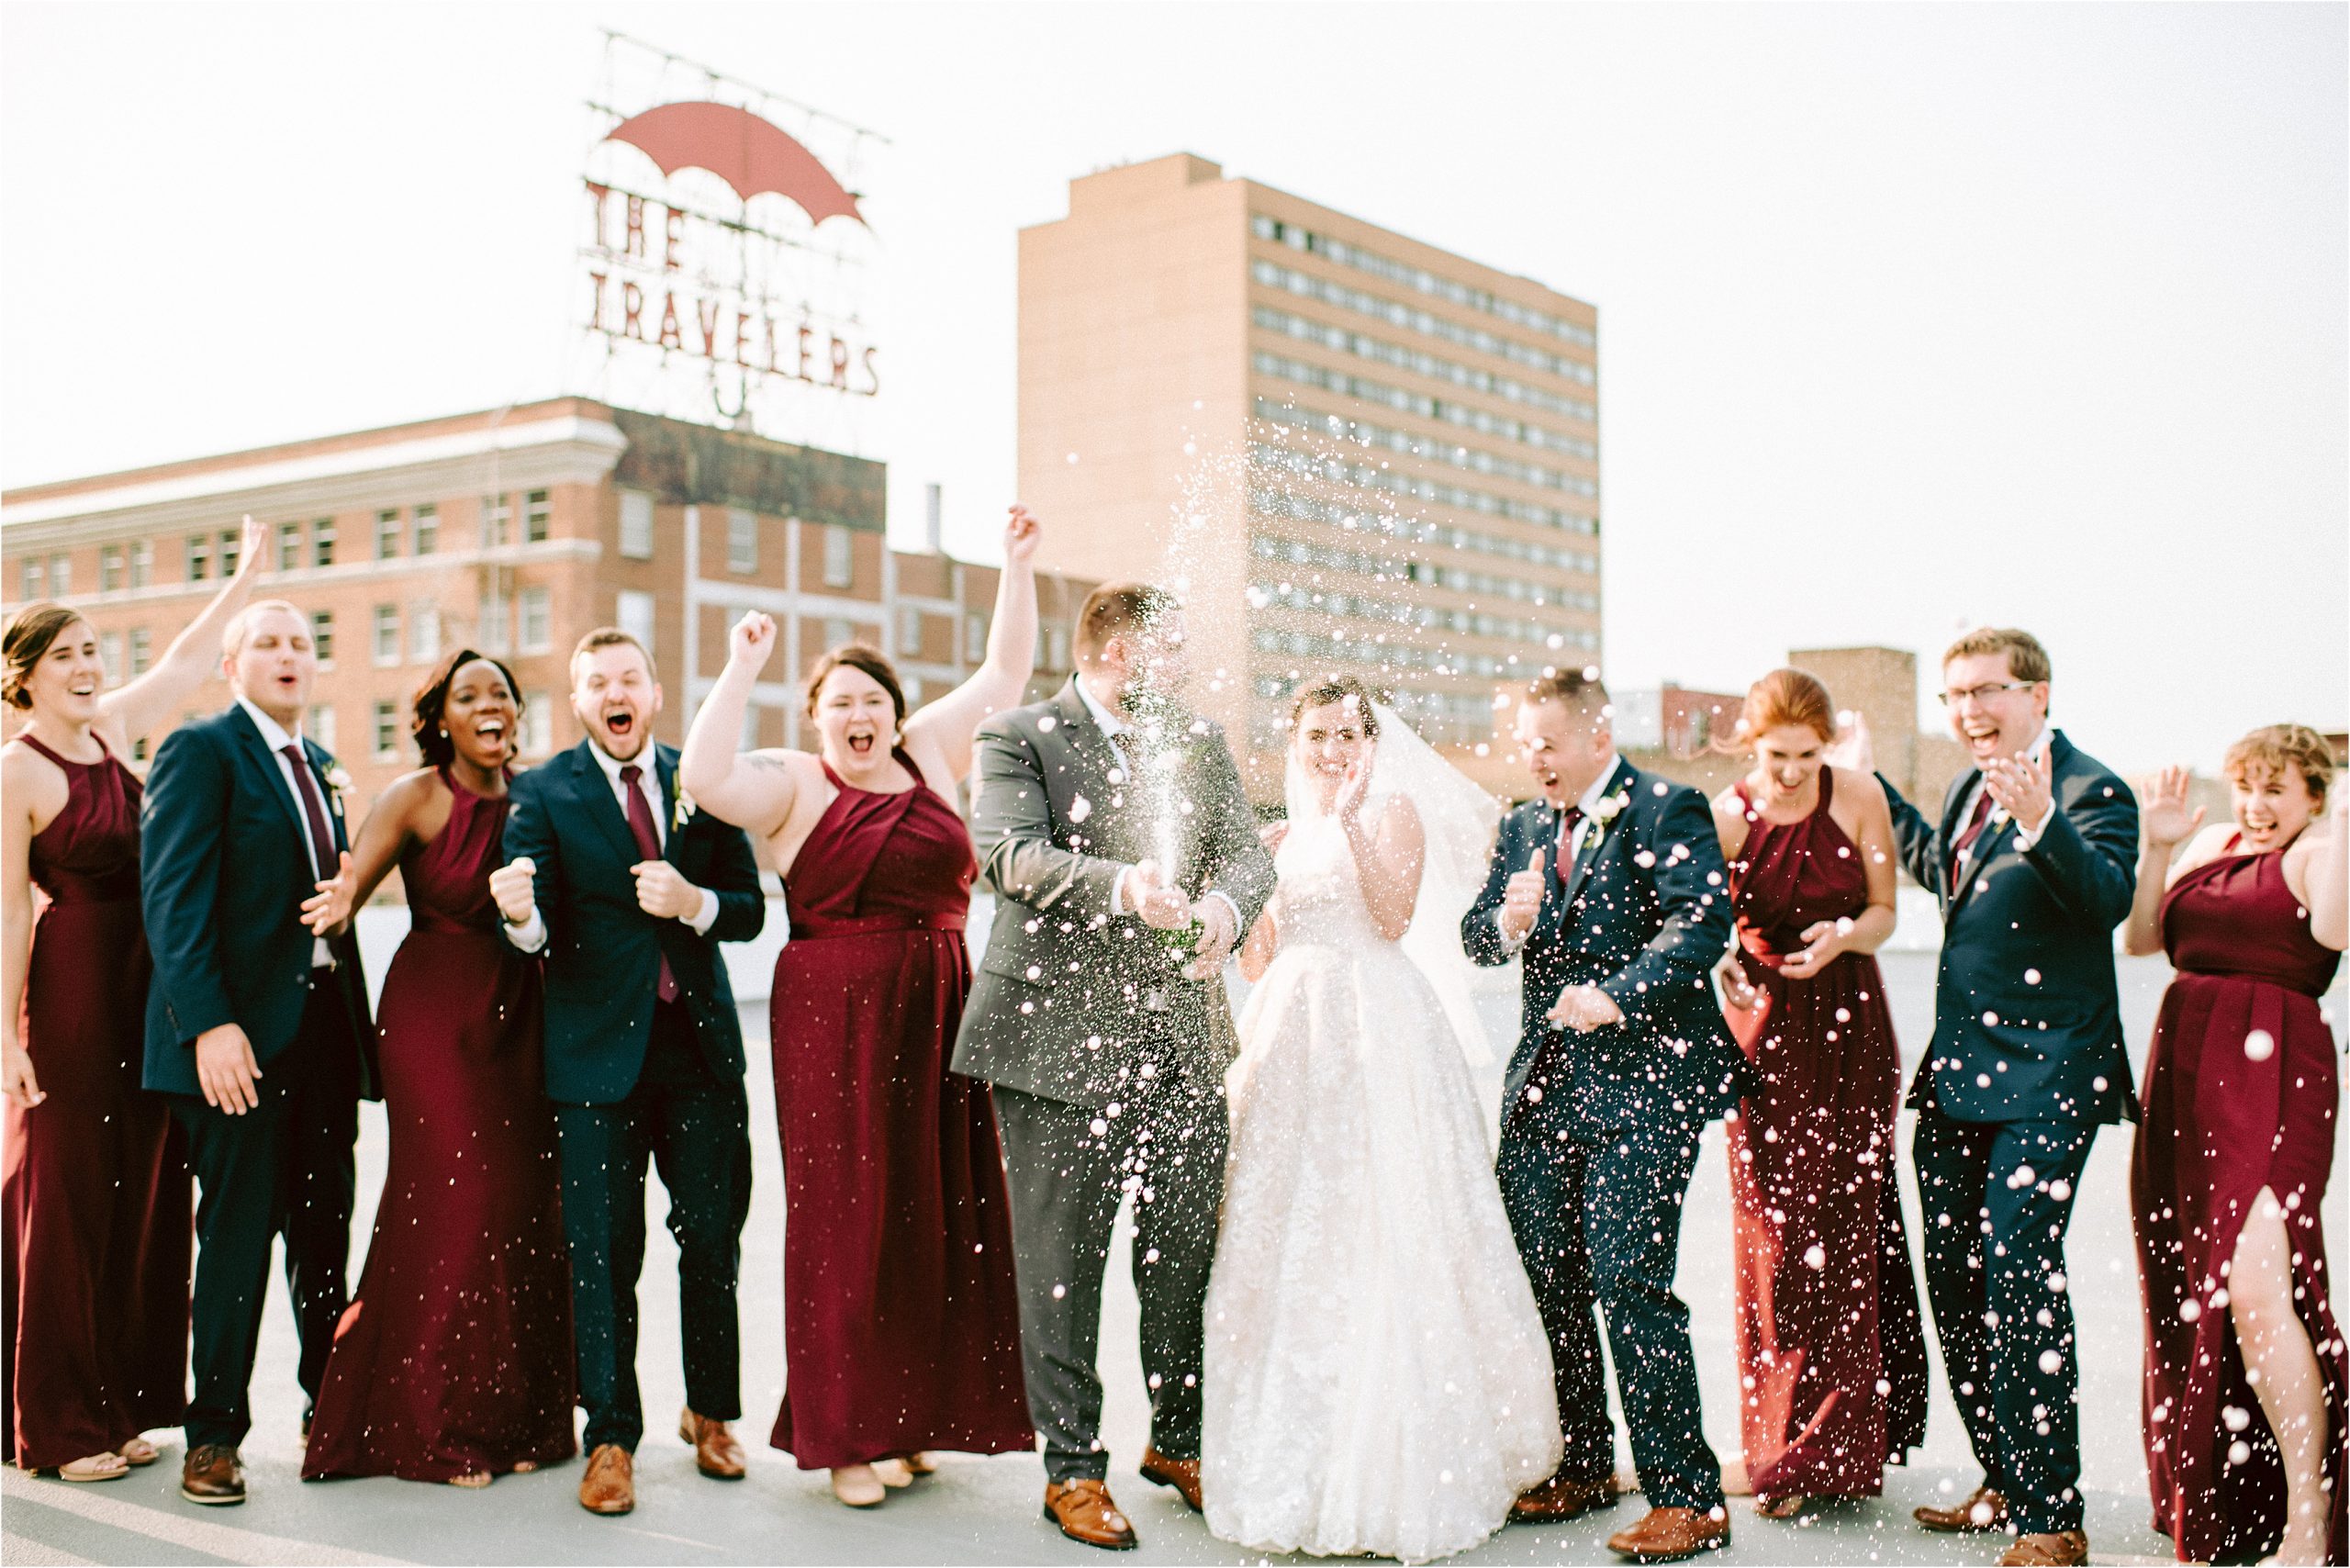 The Travelers Des Moines Wedding Photography